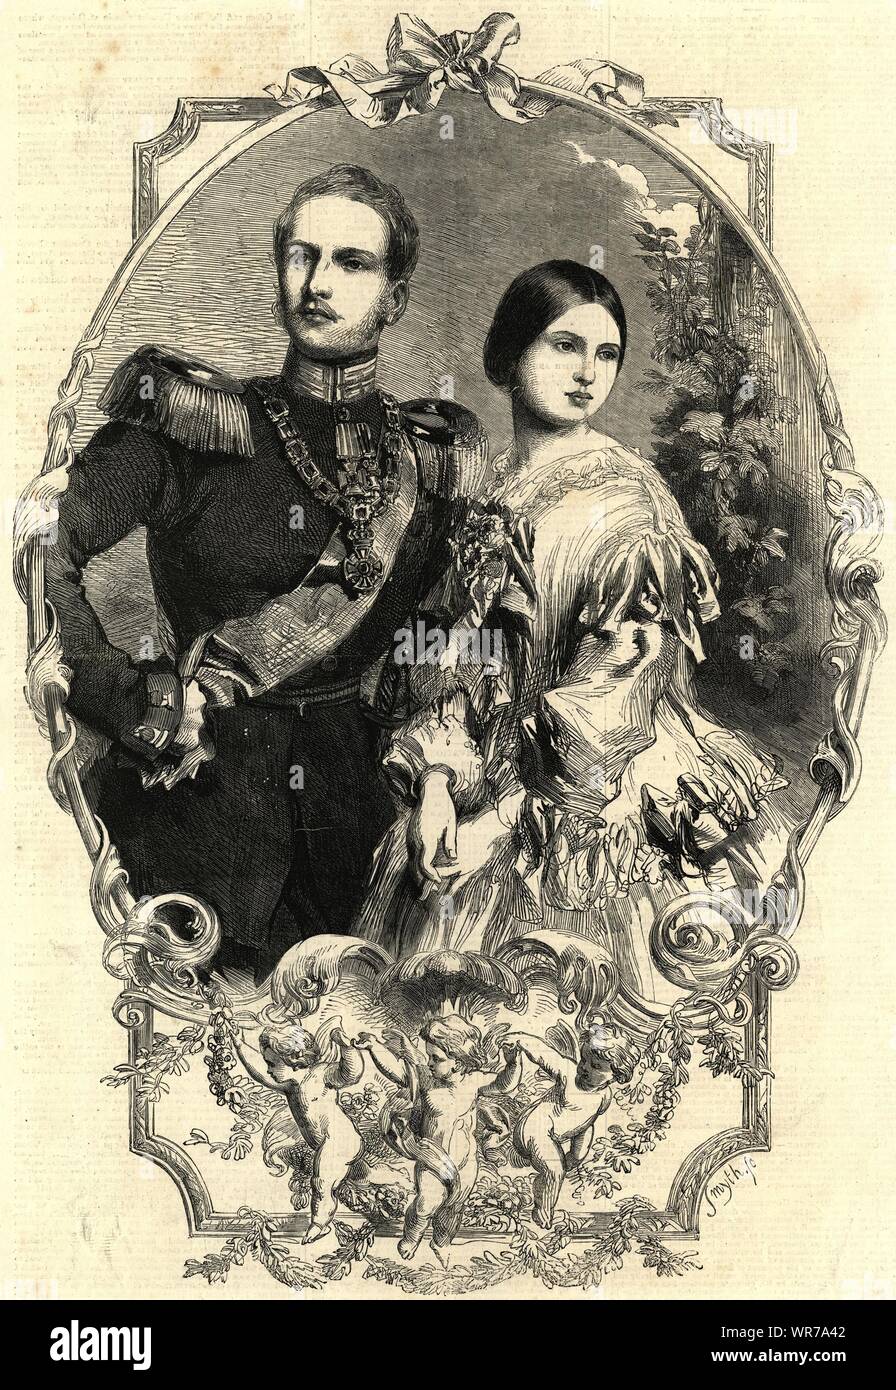 Prince Frederick William of Prussia & the Princess Royal of England 1857 Stock Photo